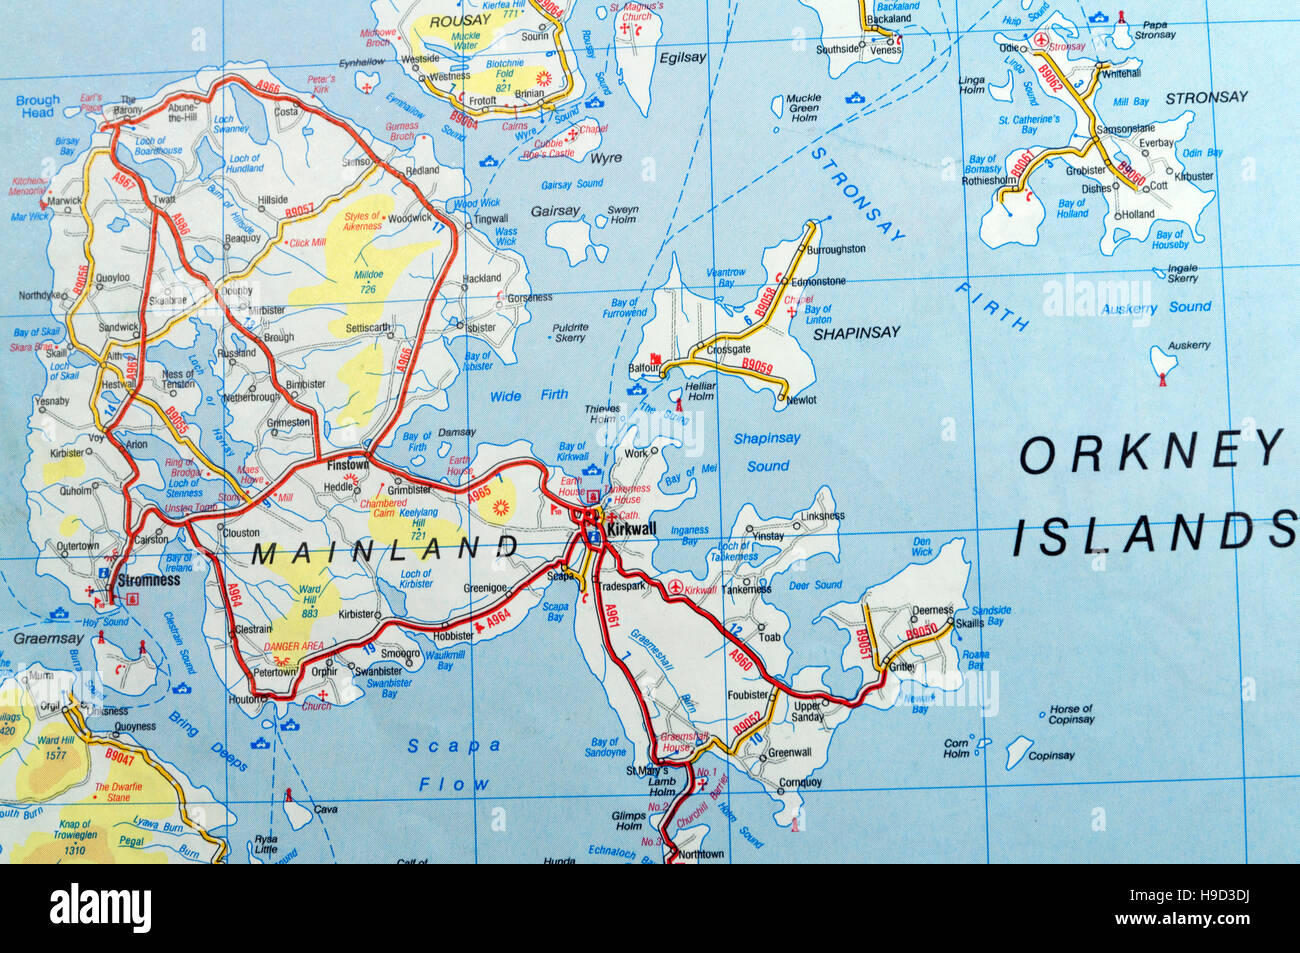 Road Map of Orkney Islands, Scotland Stock Photo